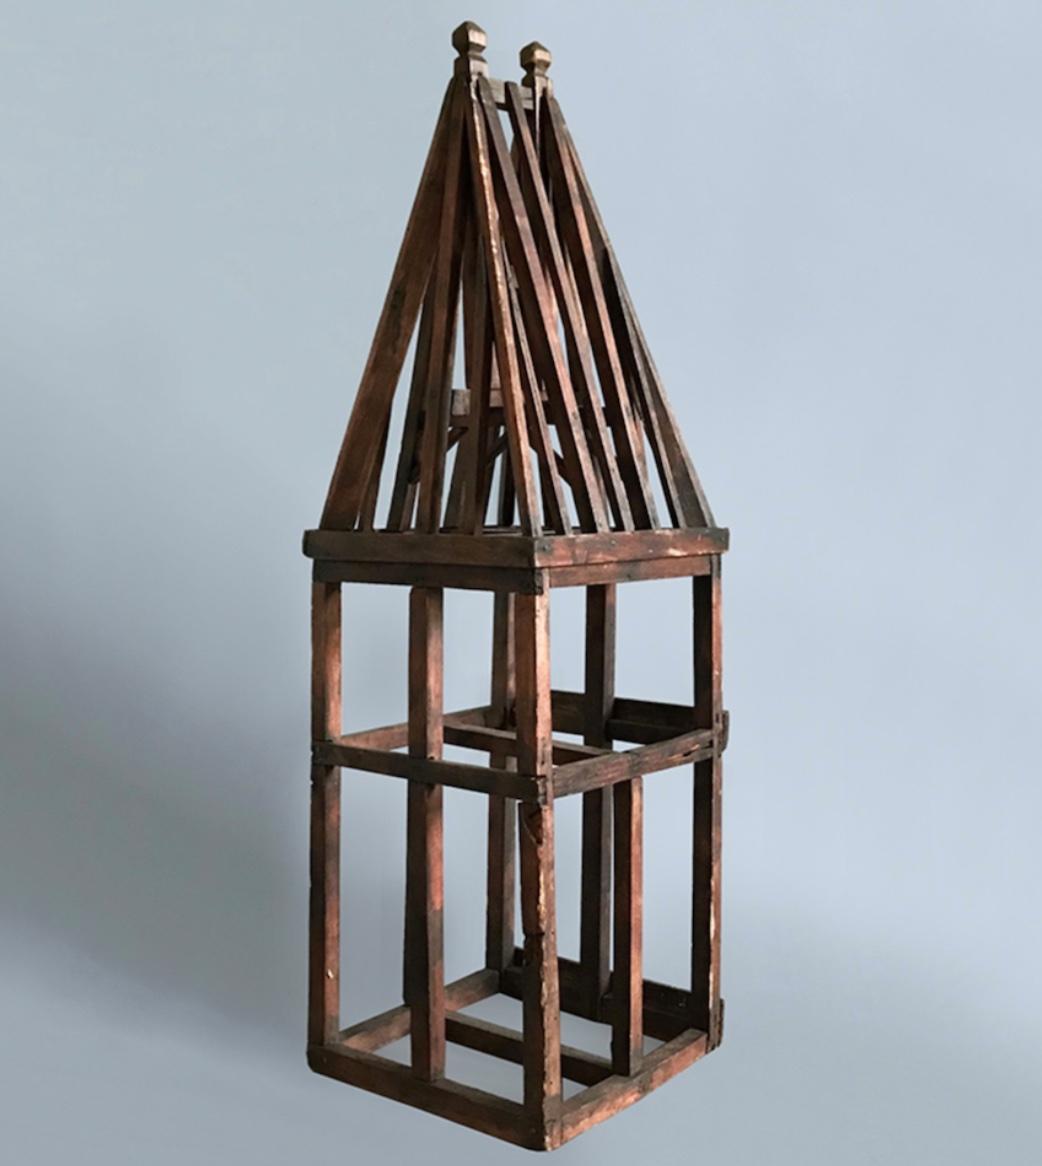 Wooden architectural apprentice model of a roof spire detail. An excellent way to bring a degree of architectural interest into any space, the piece has a great sculptural appeal and looks great from any angle.

France, circa 1900

Dimensions: 27.5H